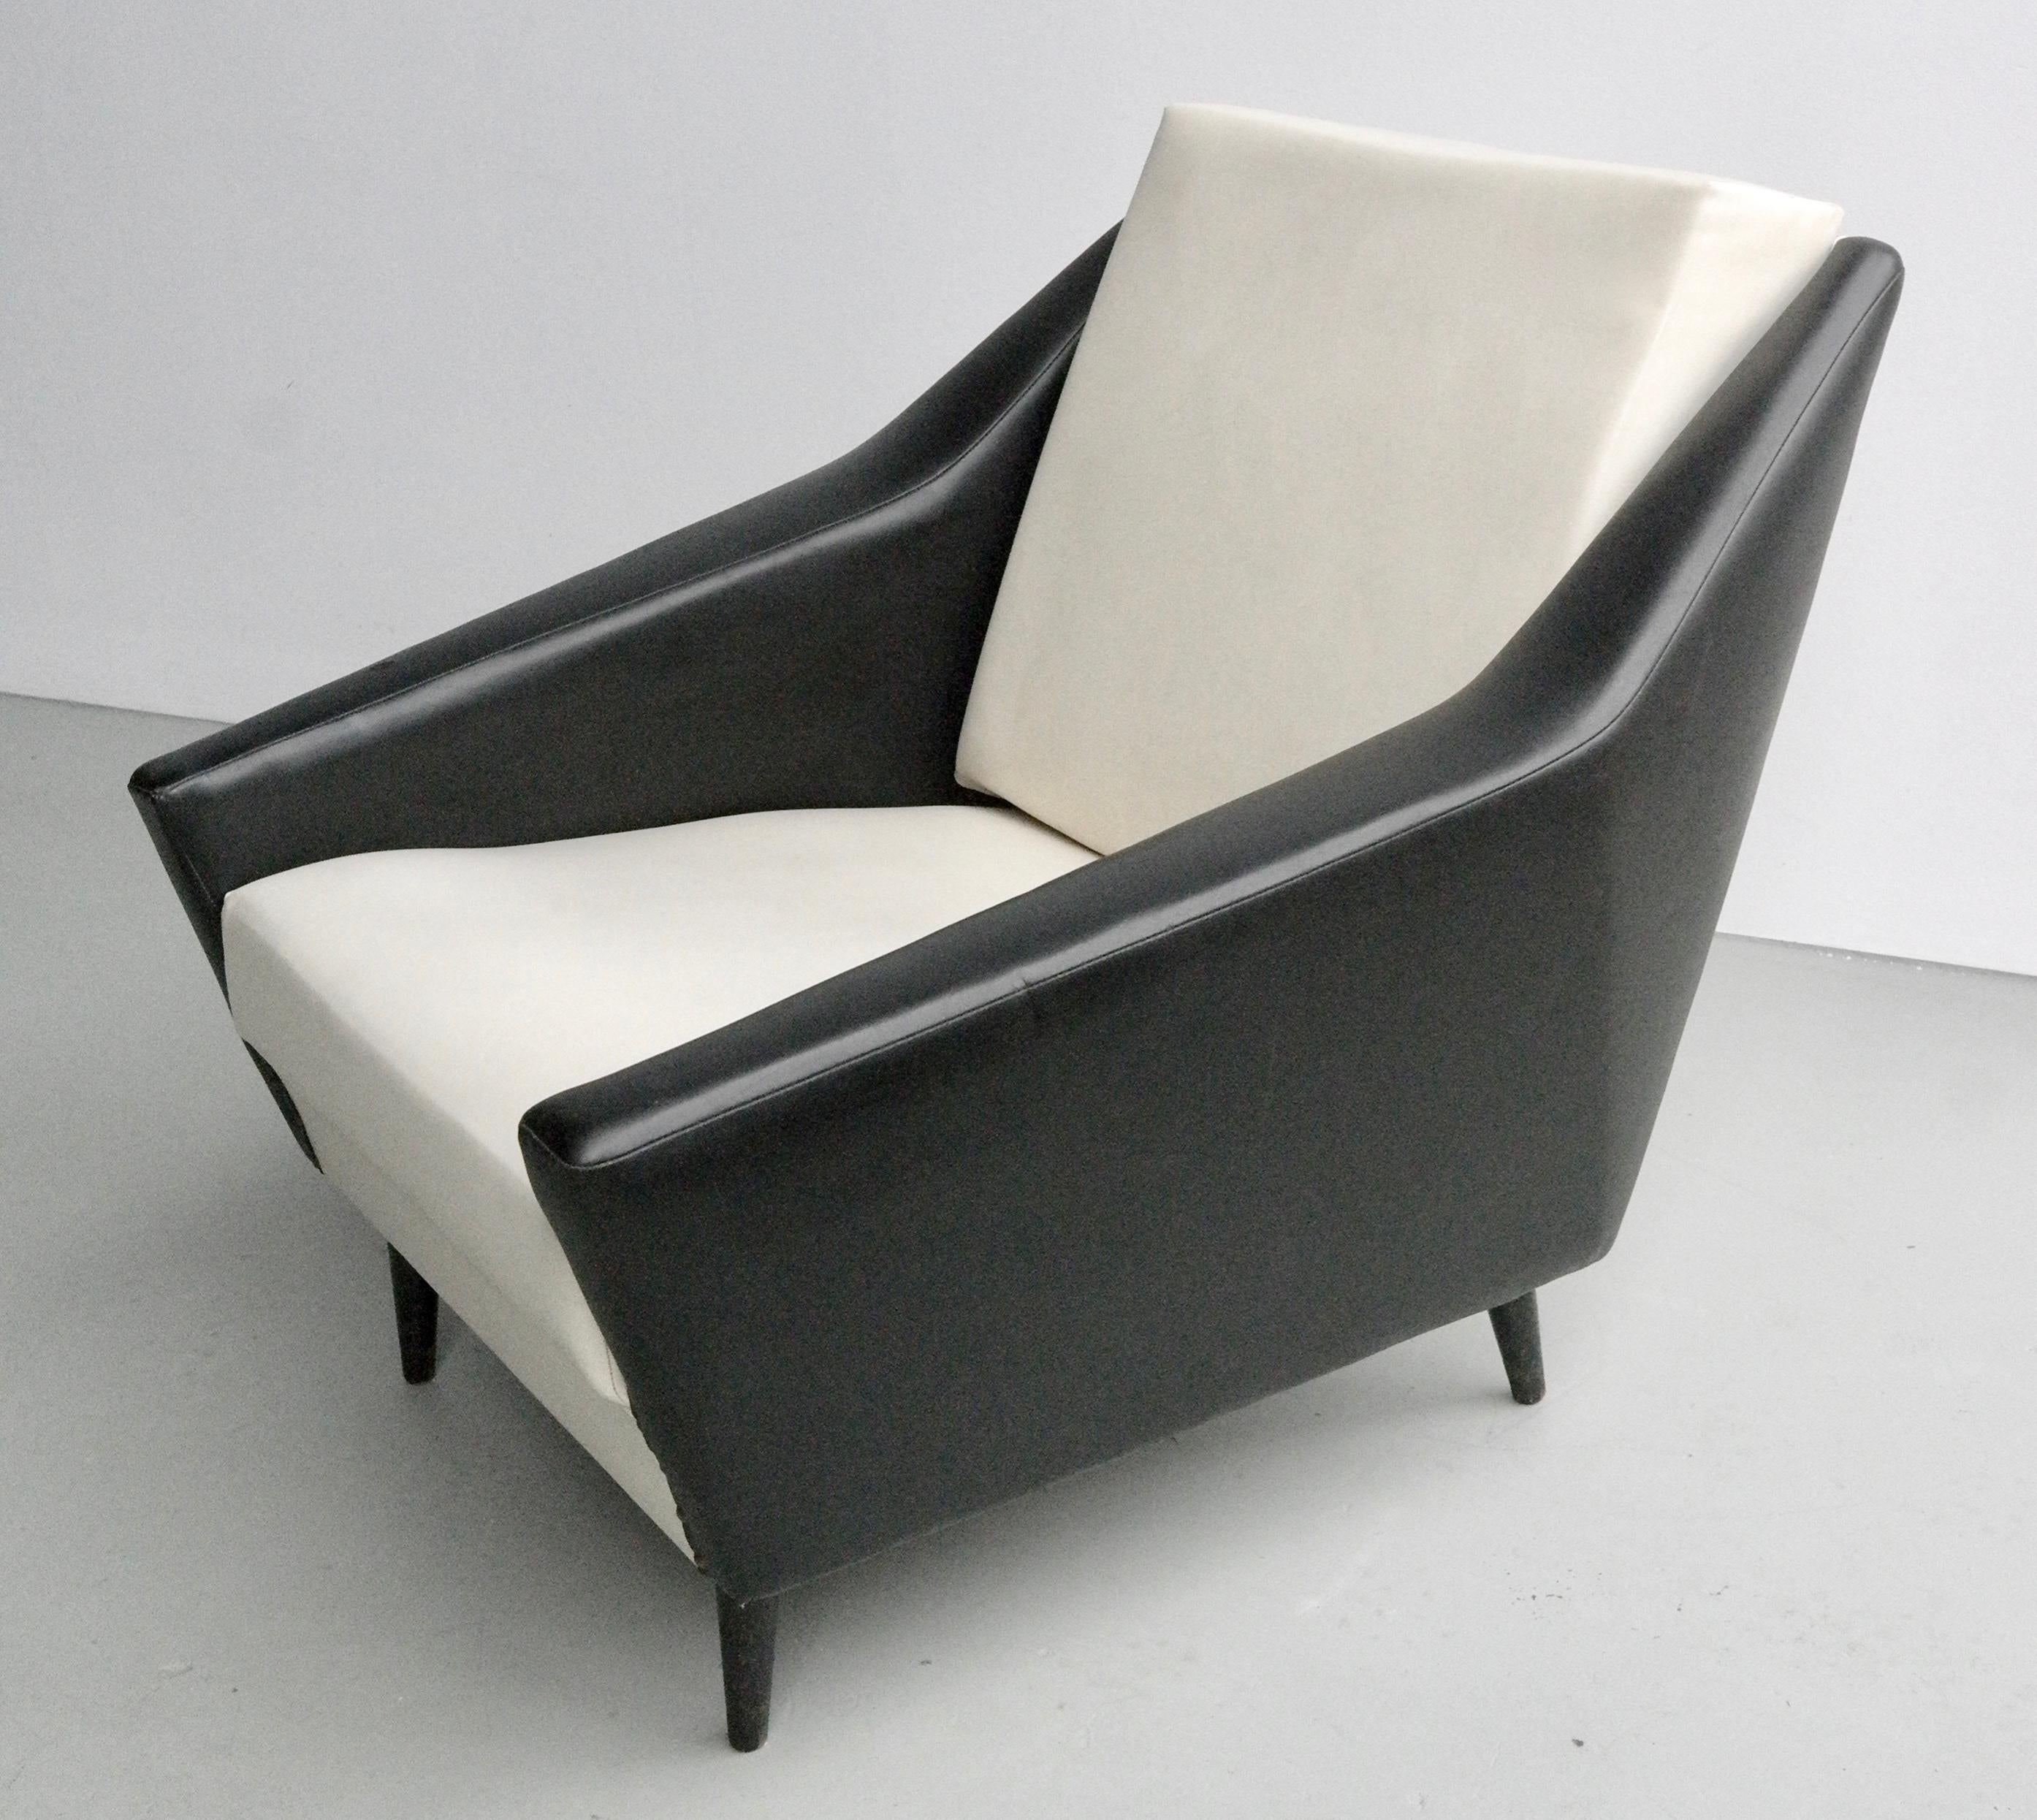 20th Century Black and White Distex Style Lounge Chair, Italy, 1950s